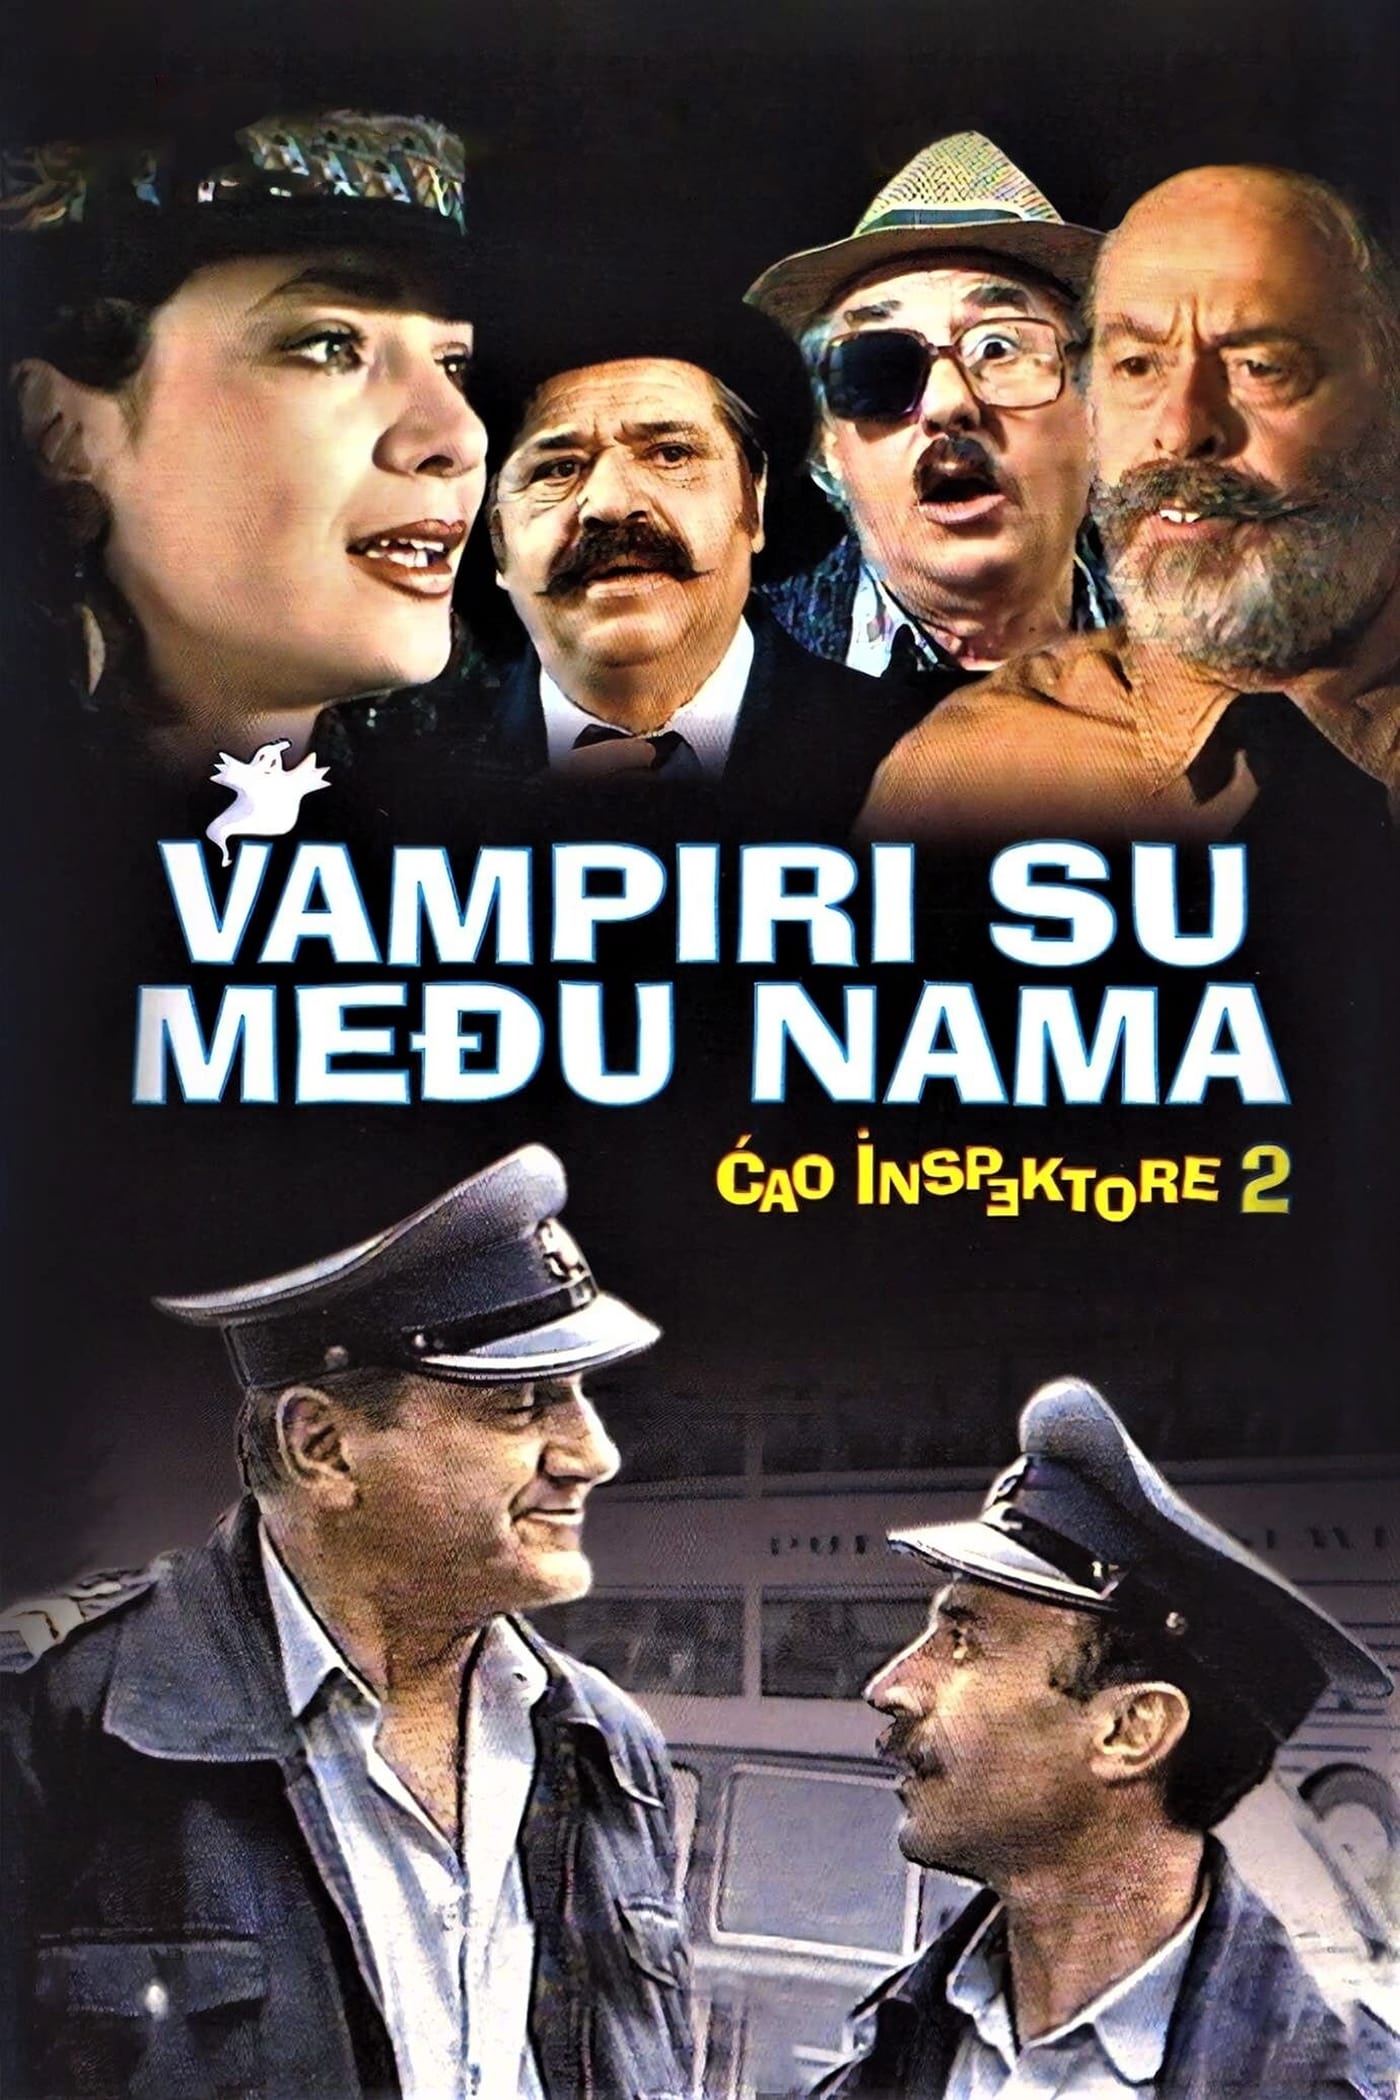 Hi, Inspector 2 - Vampires Are Among Us (1989)